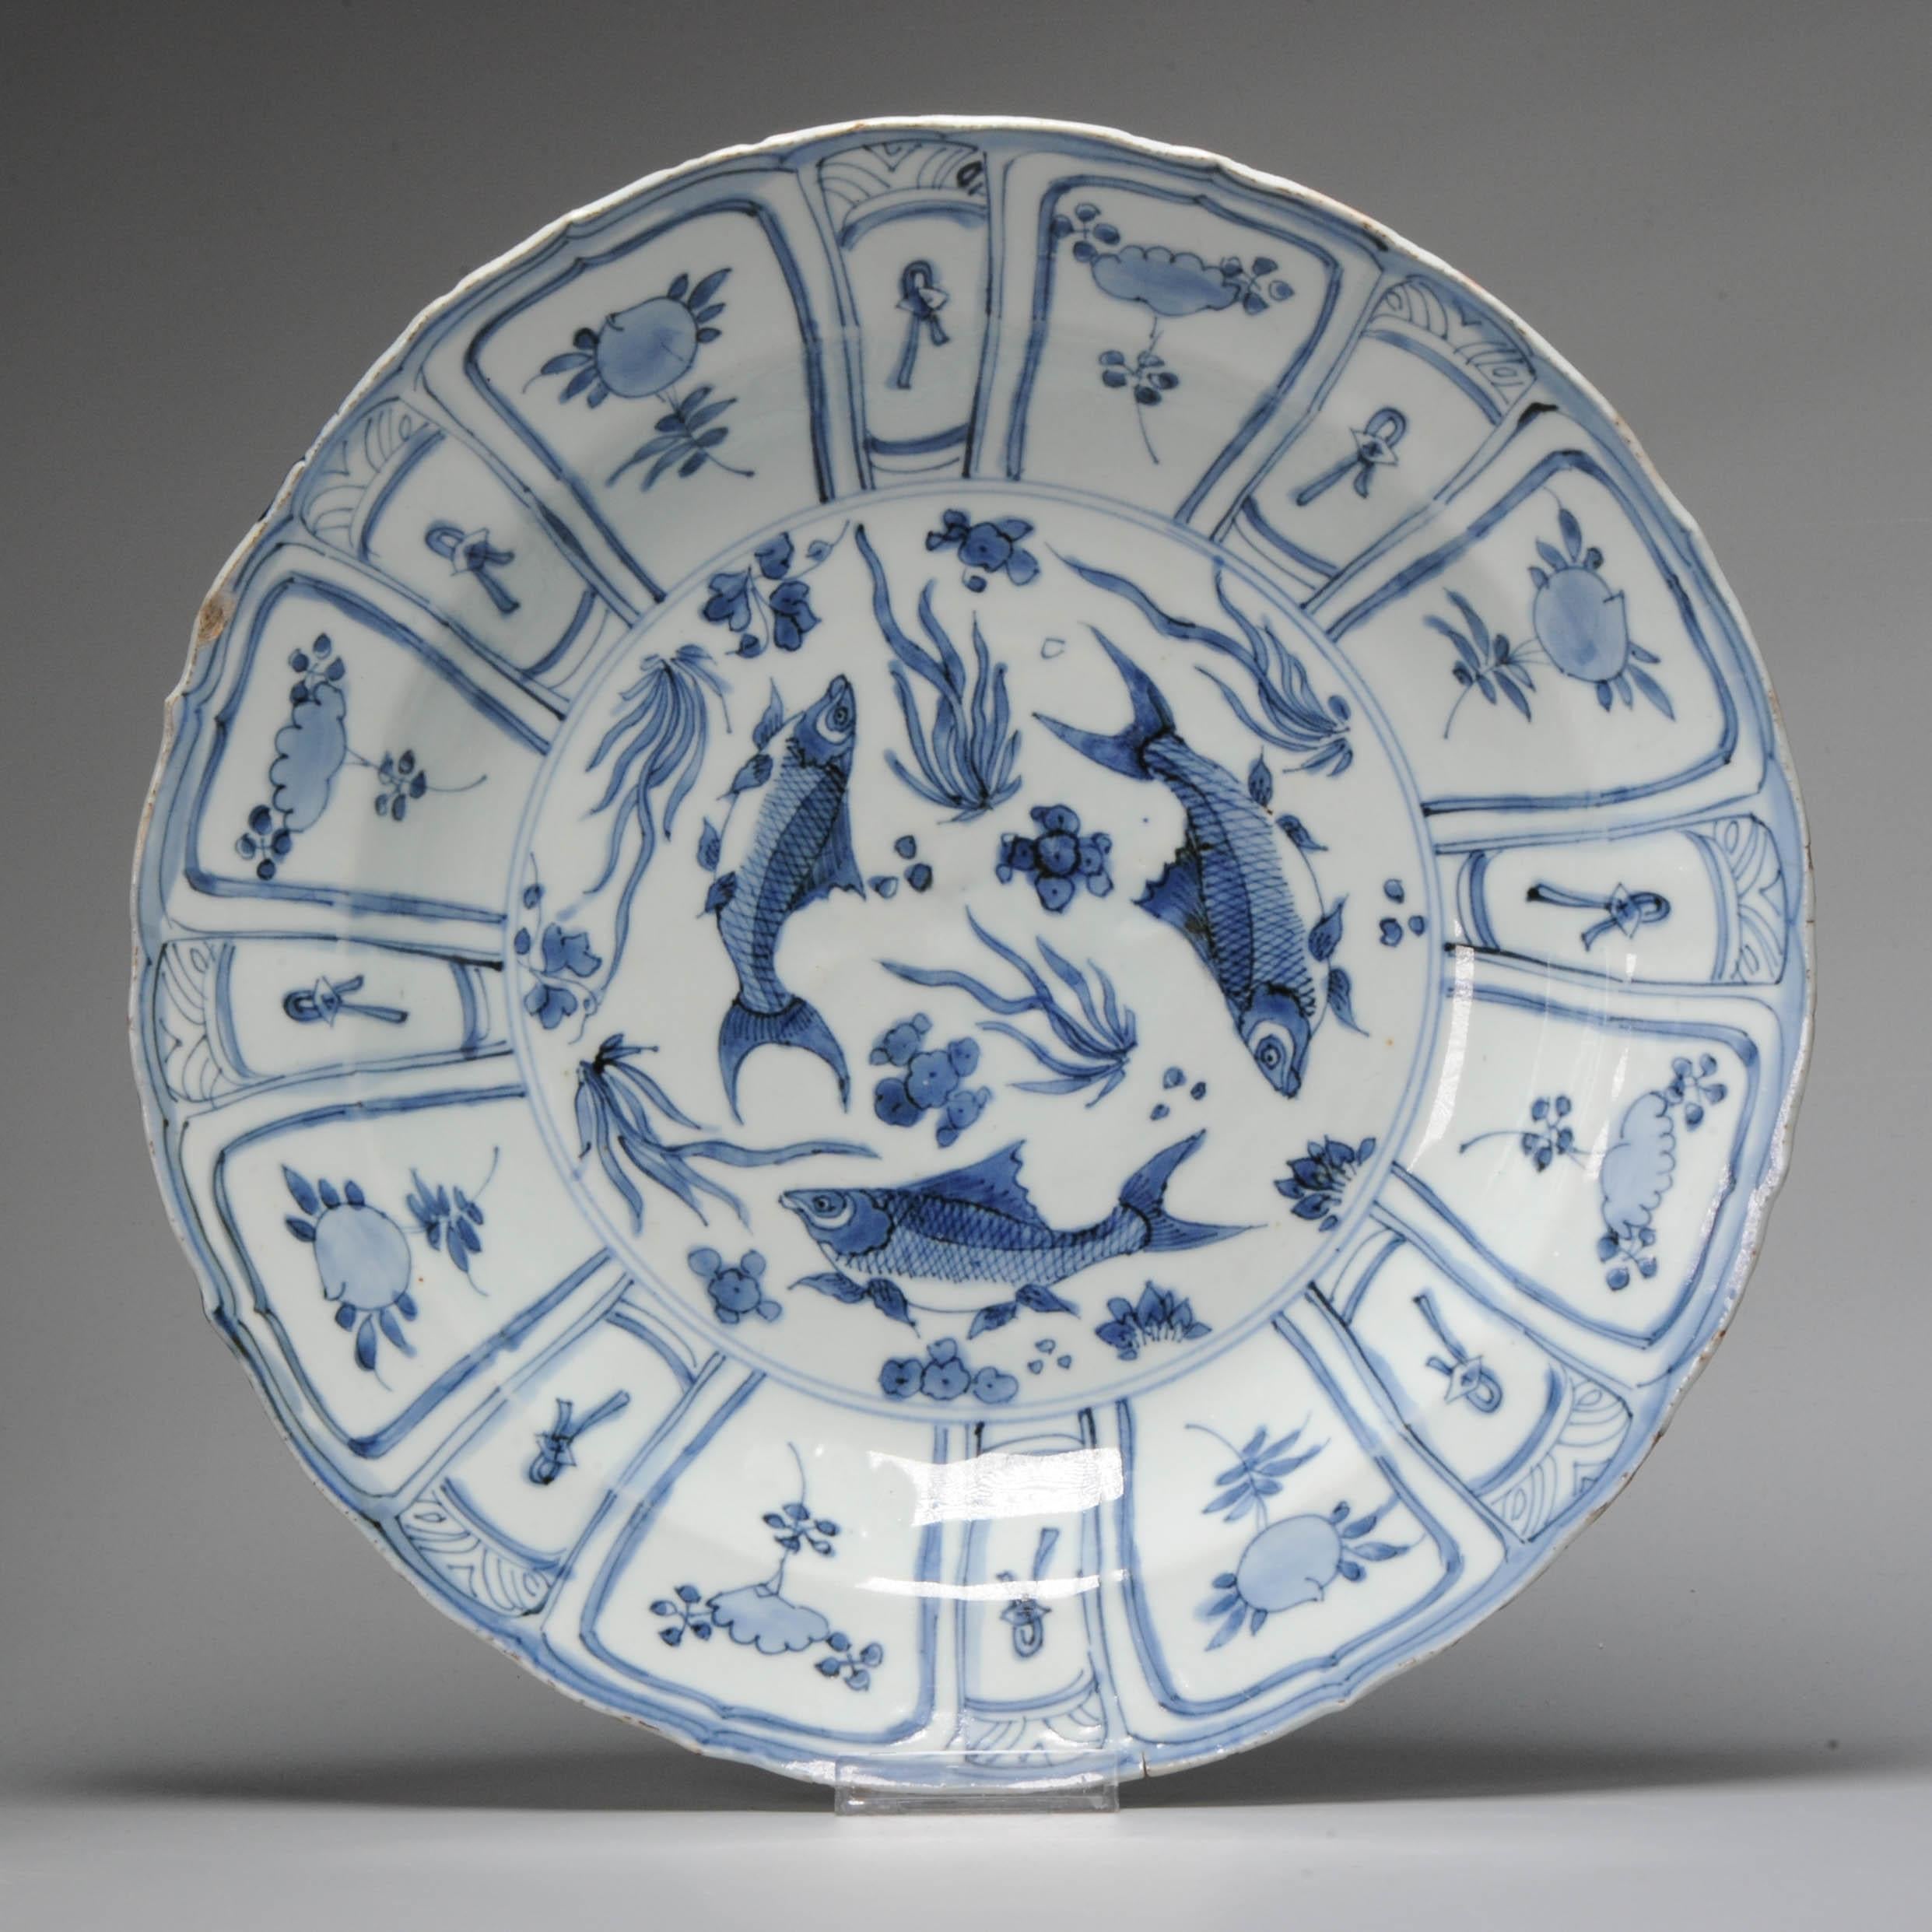 Large late Ming dynasty blue and white kraak ware export porcelain deep charger/dish. Wanli period. Decorated in the centre with three beautifully painted fishes/carps and water plants. The central design is encircled by a eight panel border on the